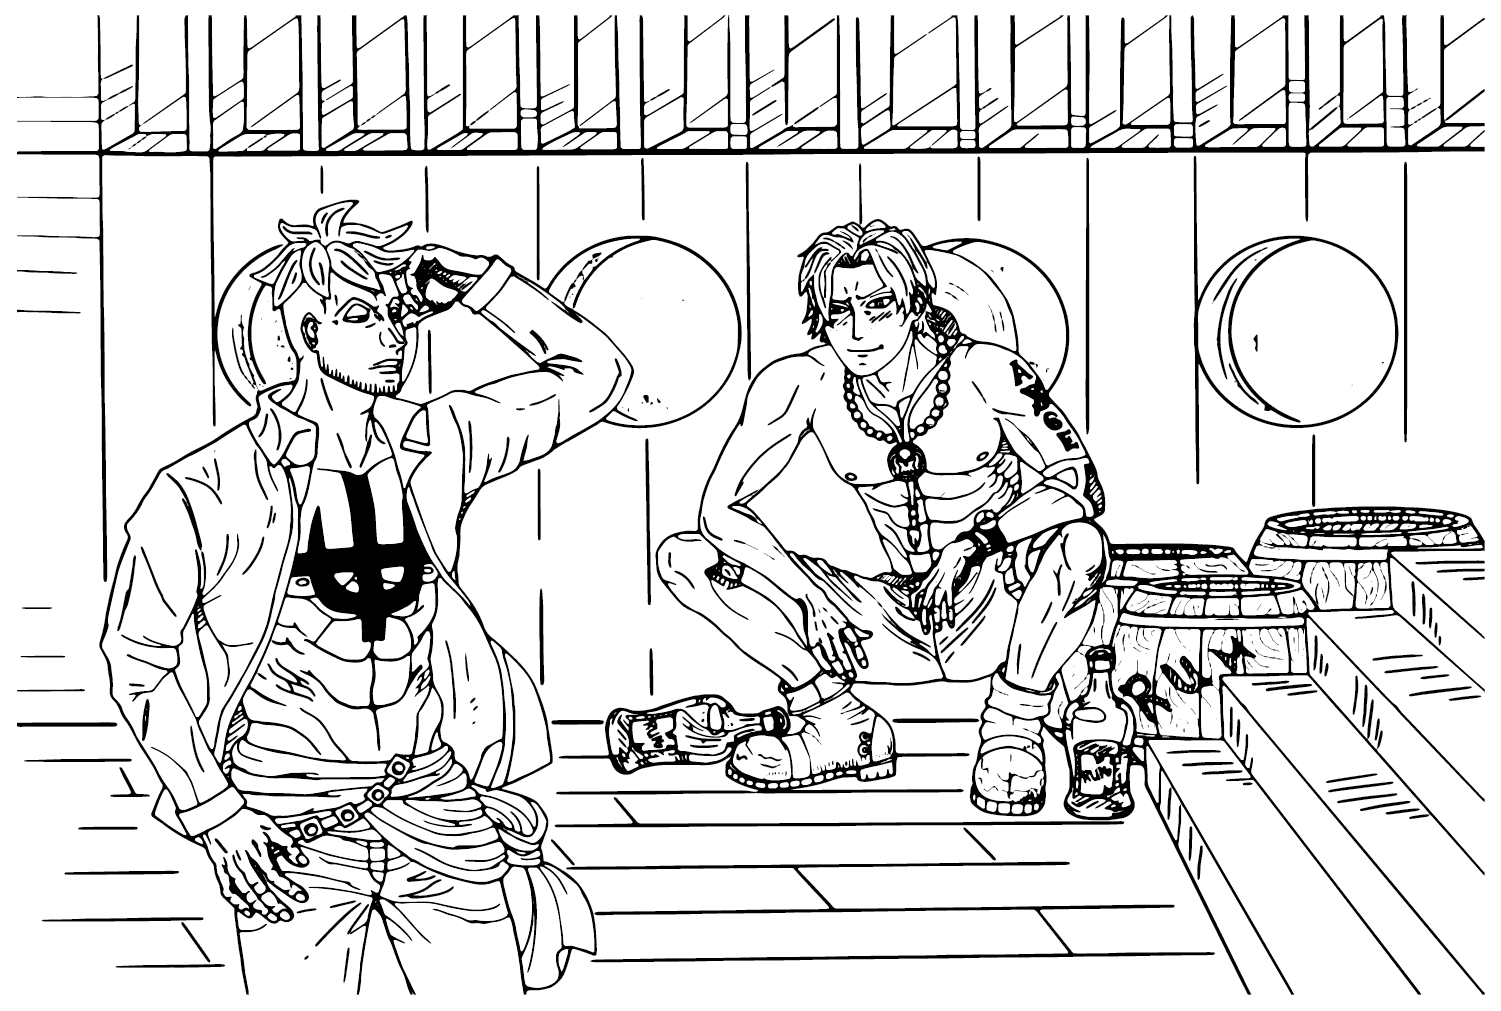 Marco and Ace Coloring Page from Portgas D. Ace